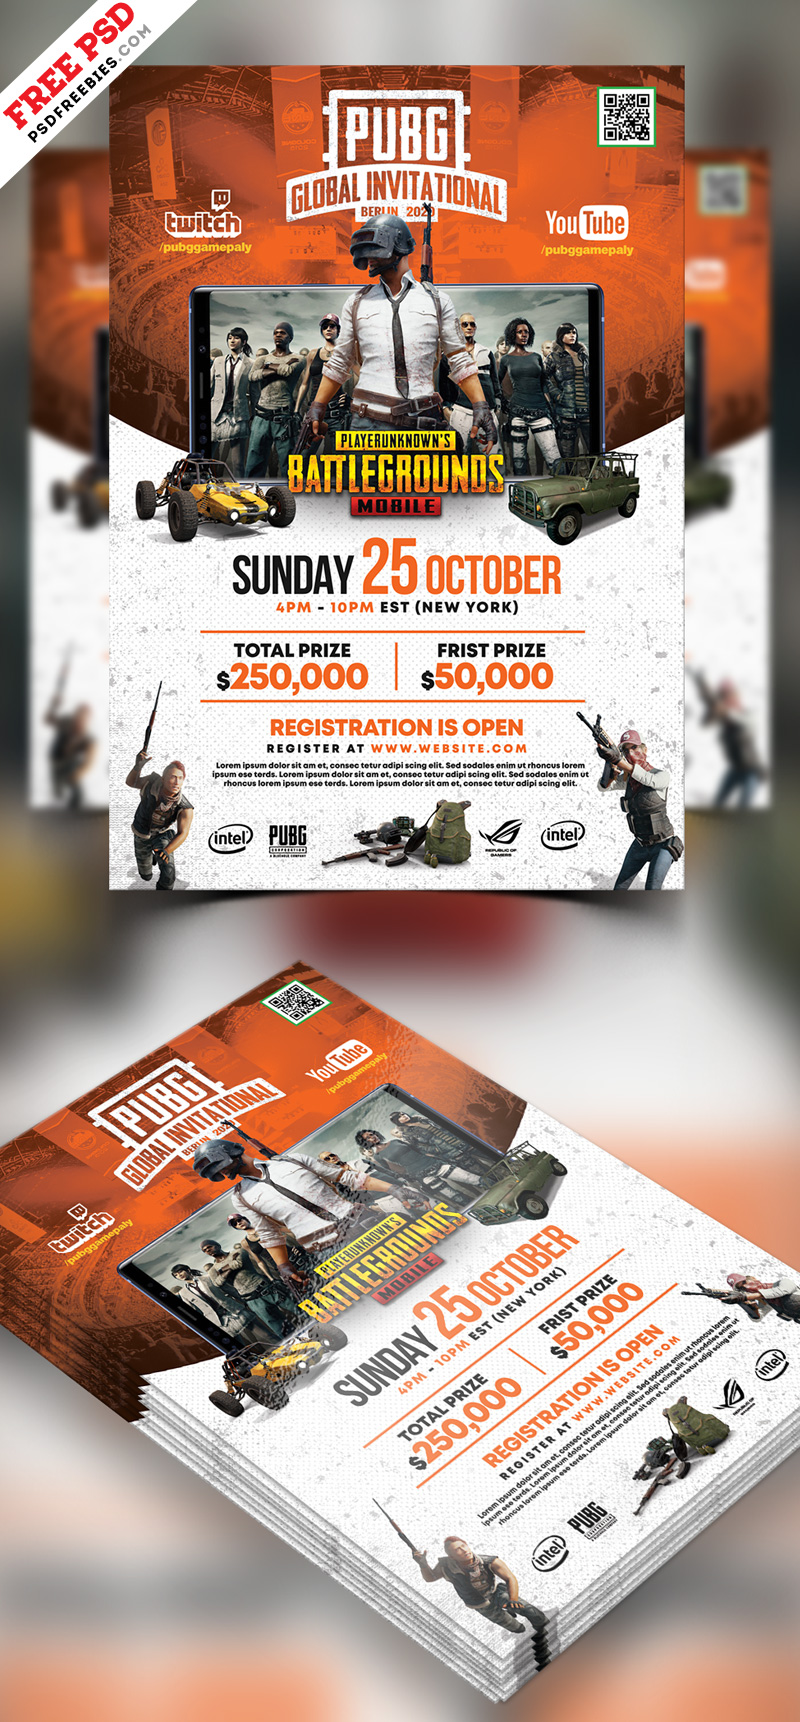 PUBG-Gaming-Event-Flyer-PSD-Free-Download2